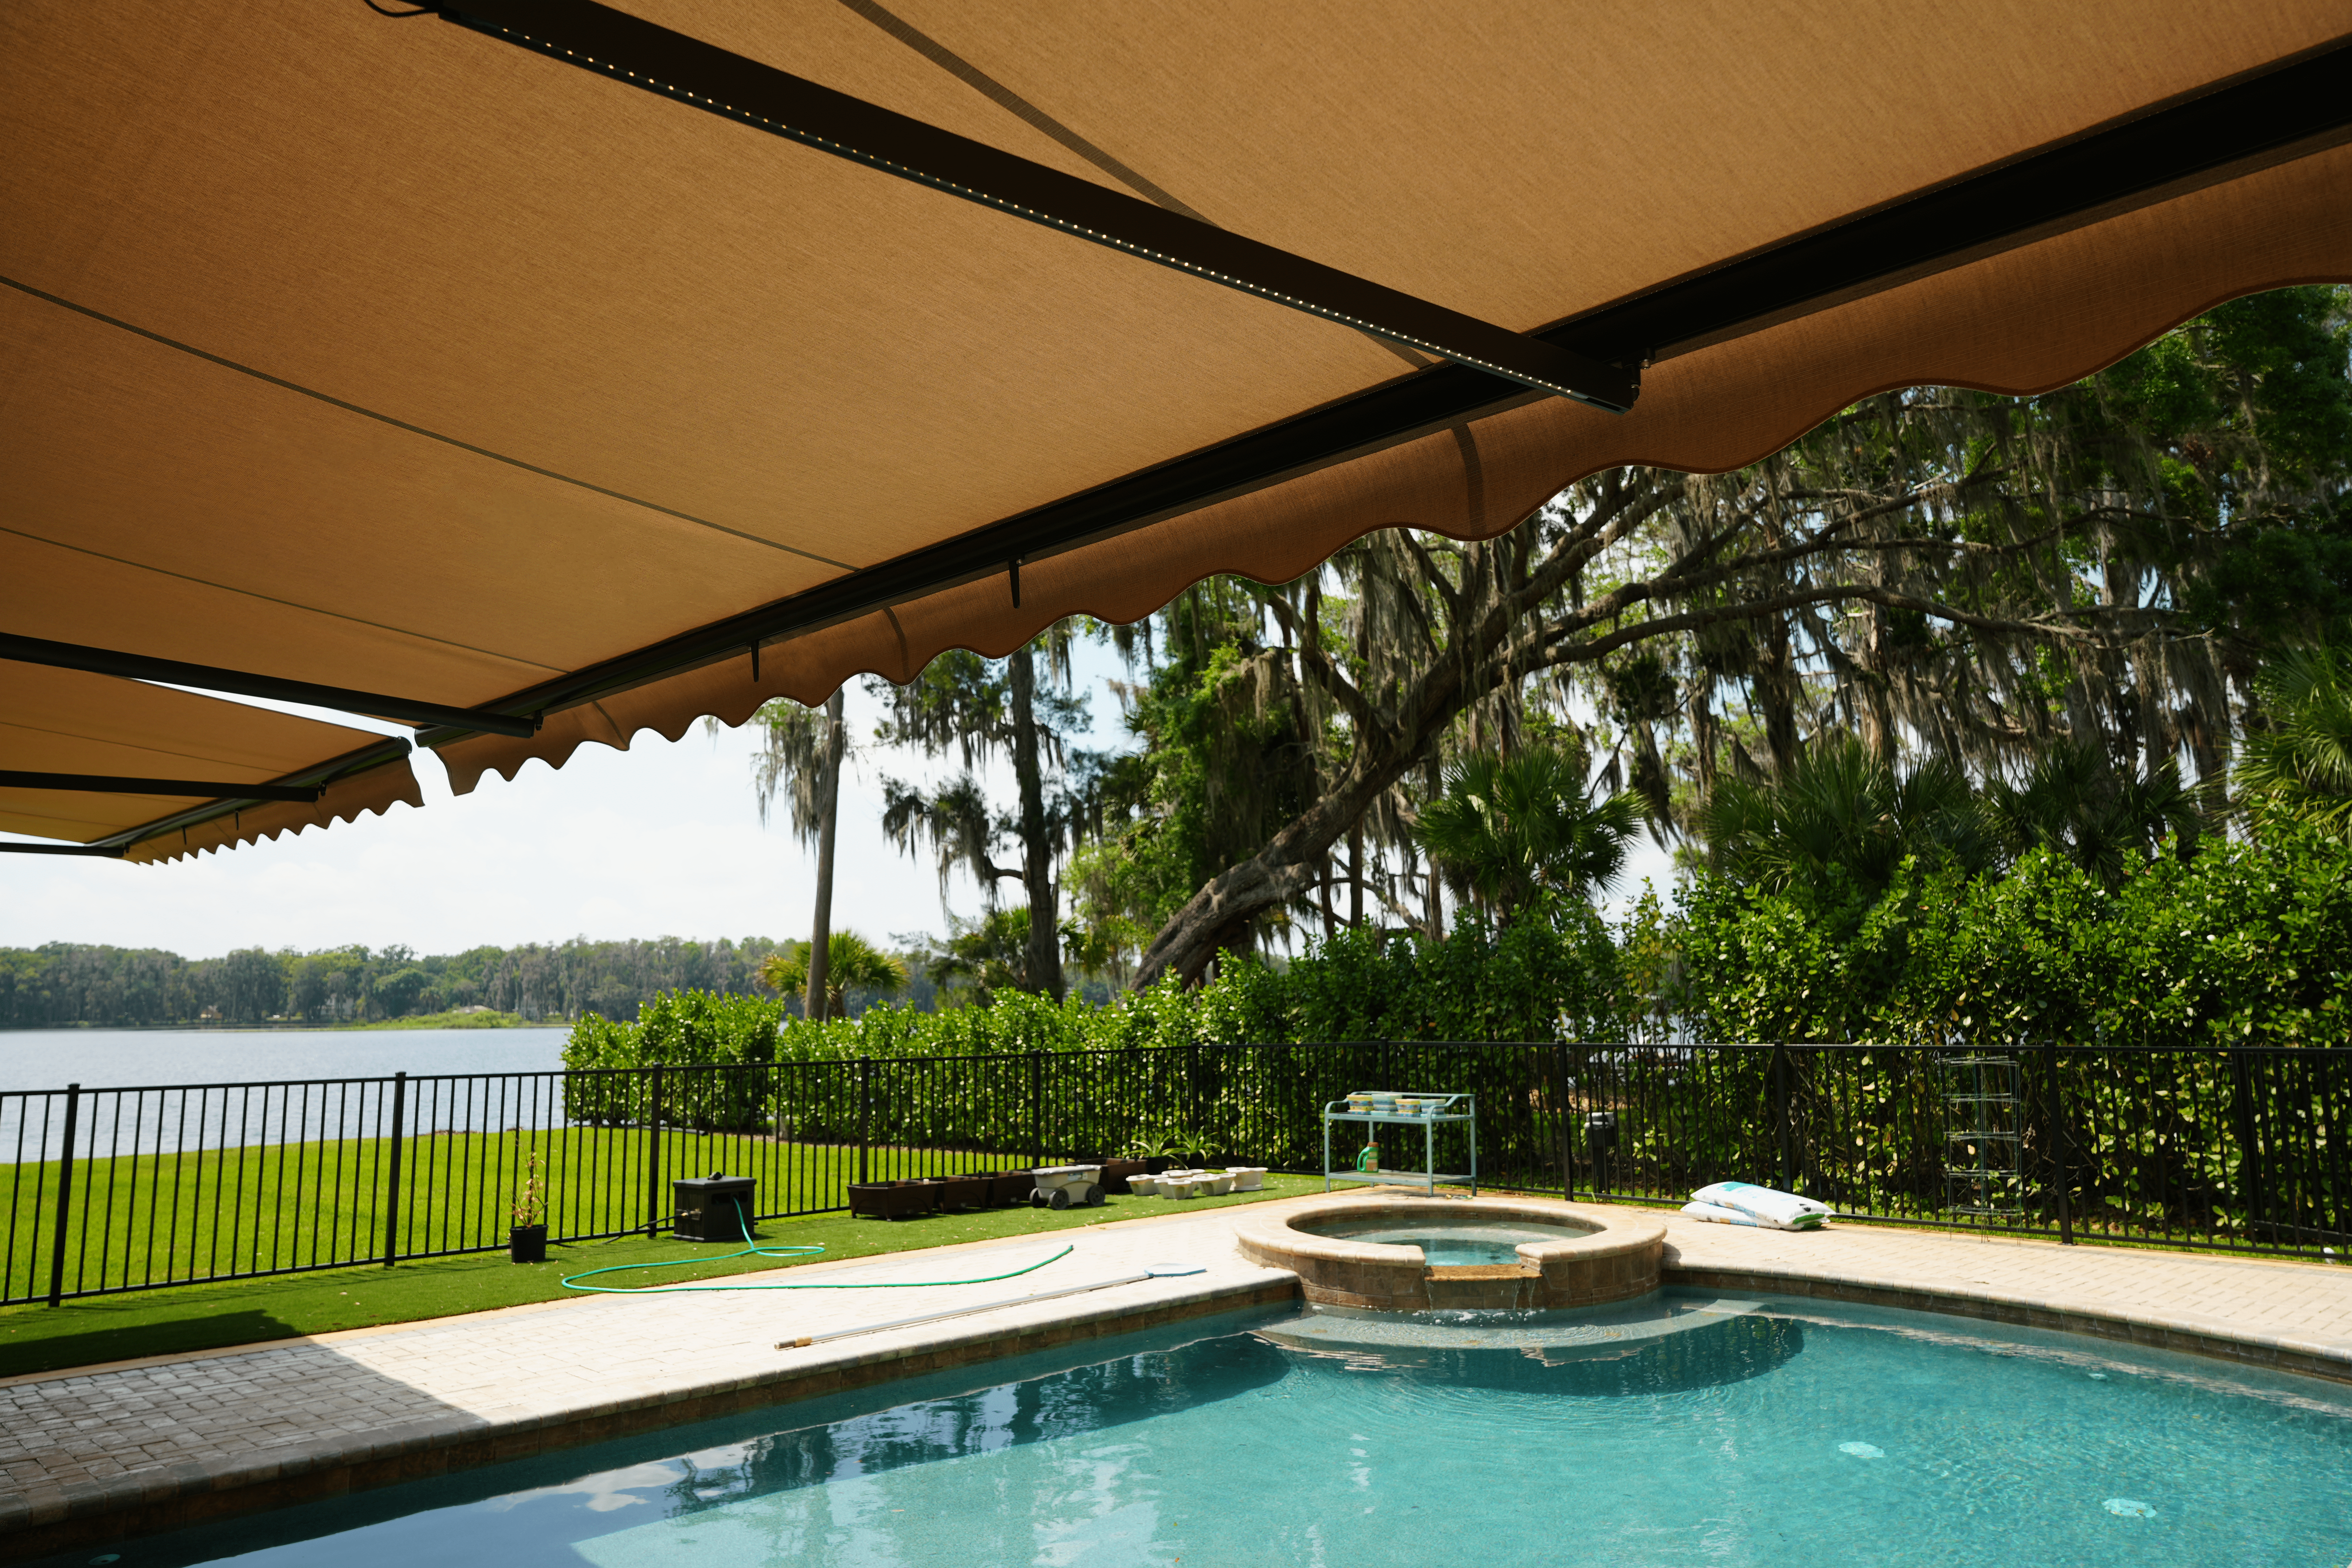 Awnings,Retractable Awnings